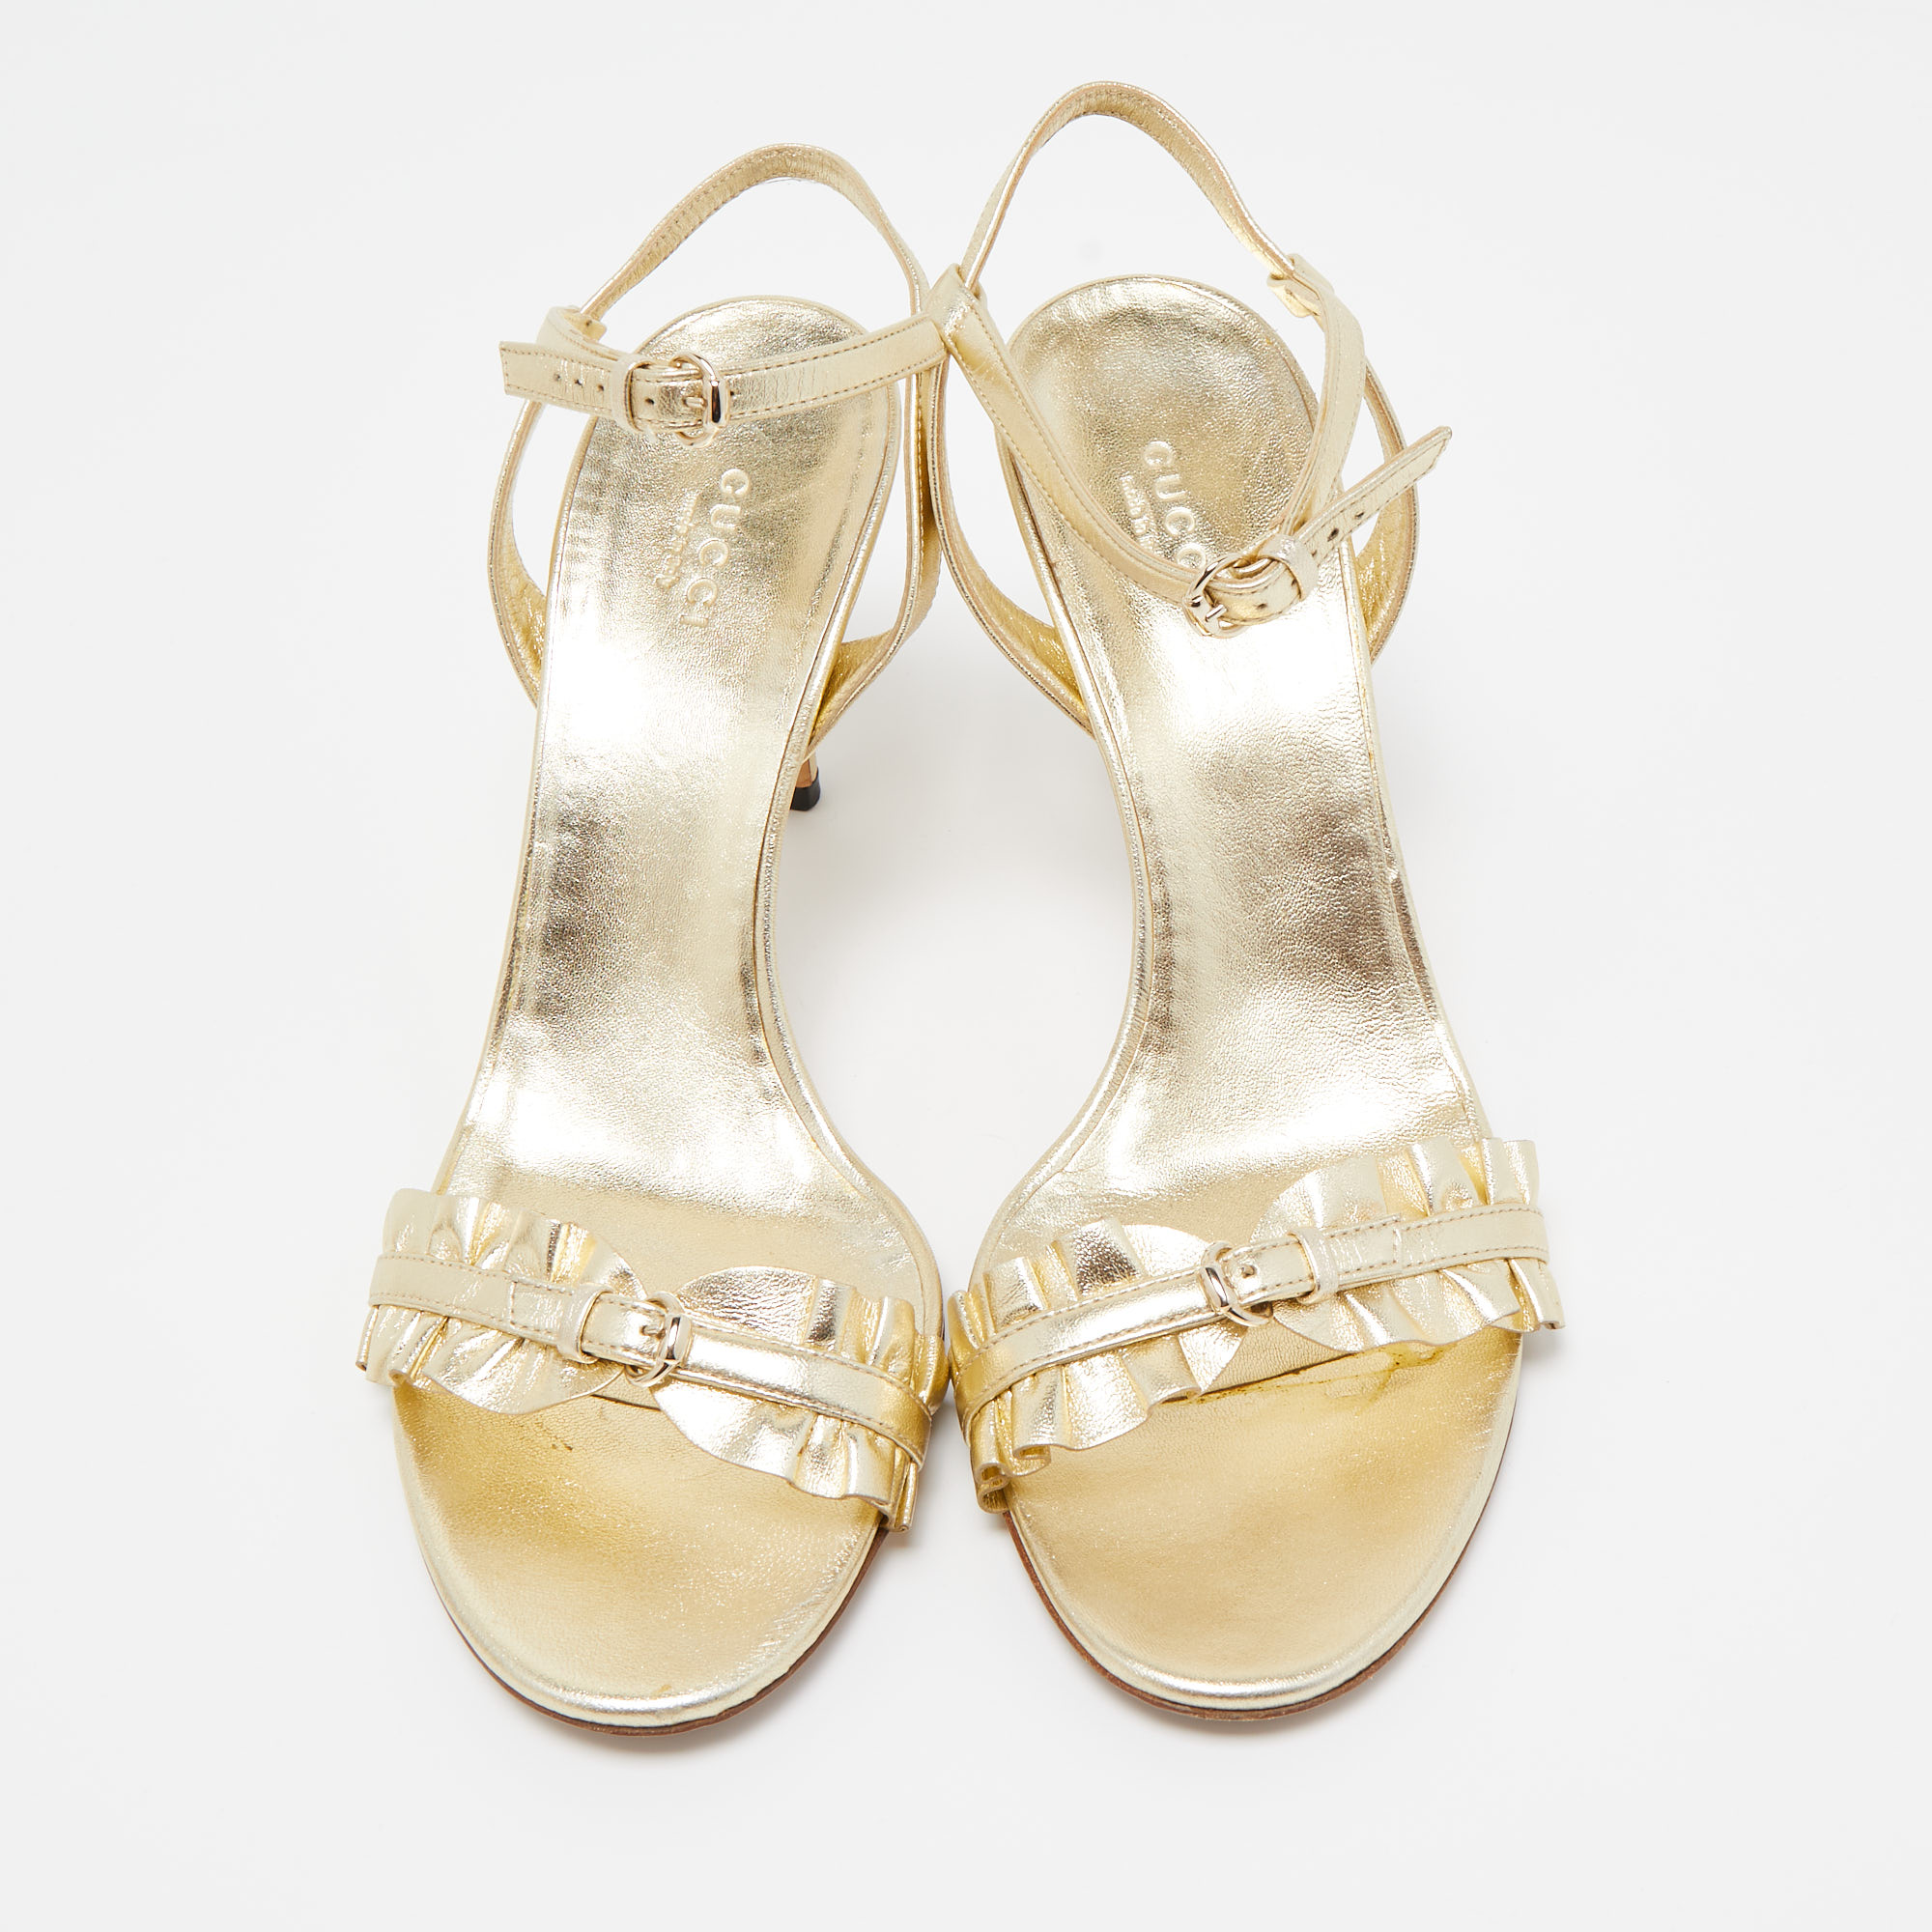 Gucci Gold Ruffled Leather Ankle Strap Sandals Size 39.5